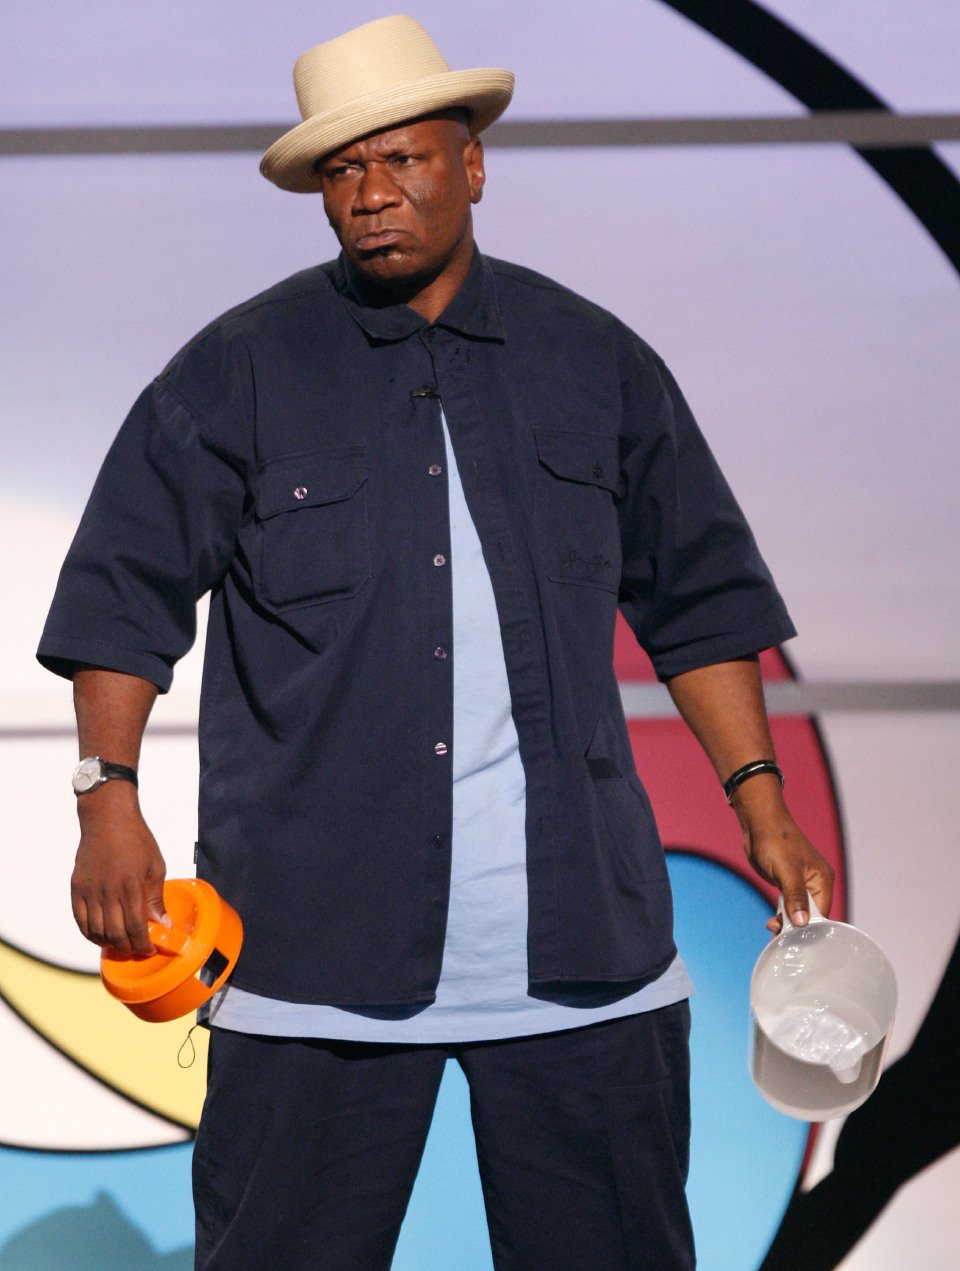 Ving Rhames performs a skit onstage during the 2009 BET Awards. | Source: Getty Images